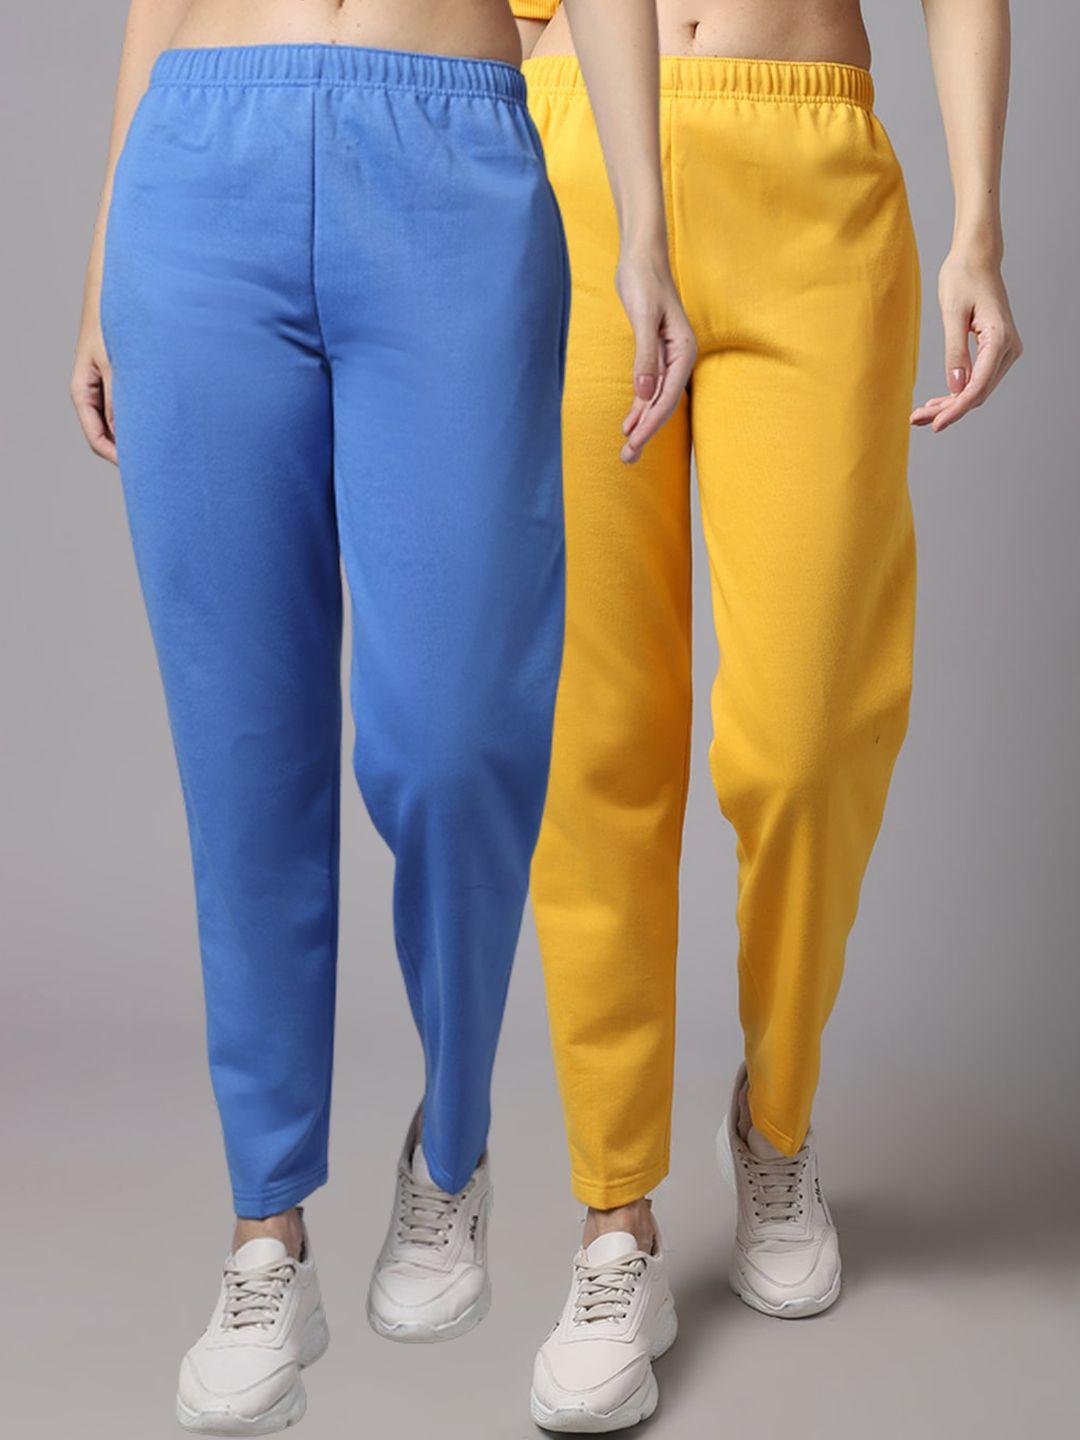 vimal-jonney-women-pack-of-2-blue-&-yellow-solid-pure-cotton-track-pants